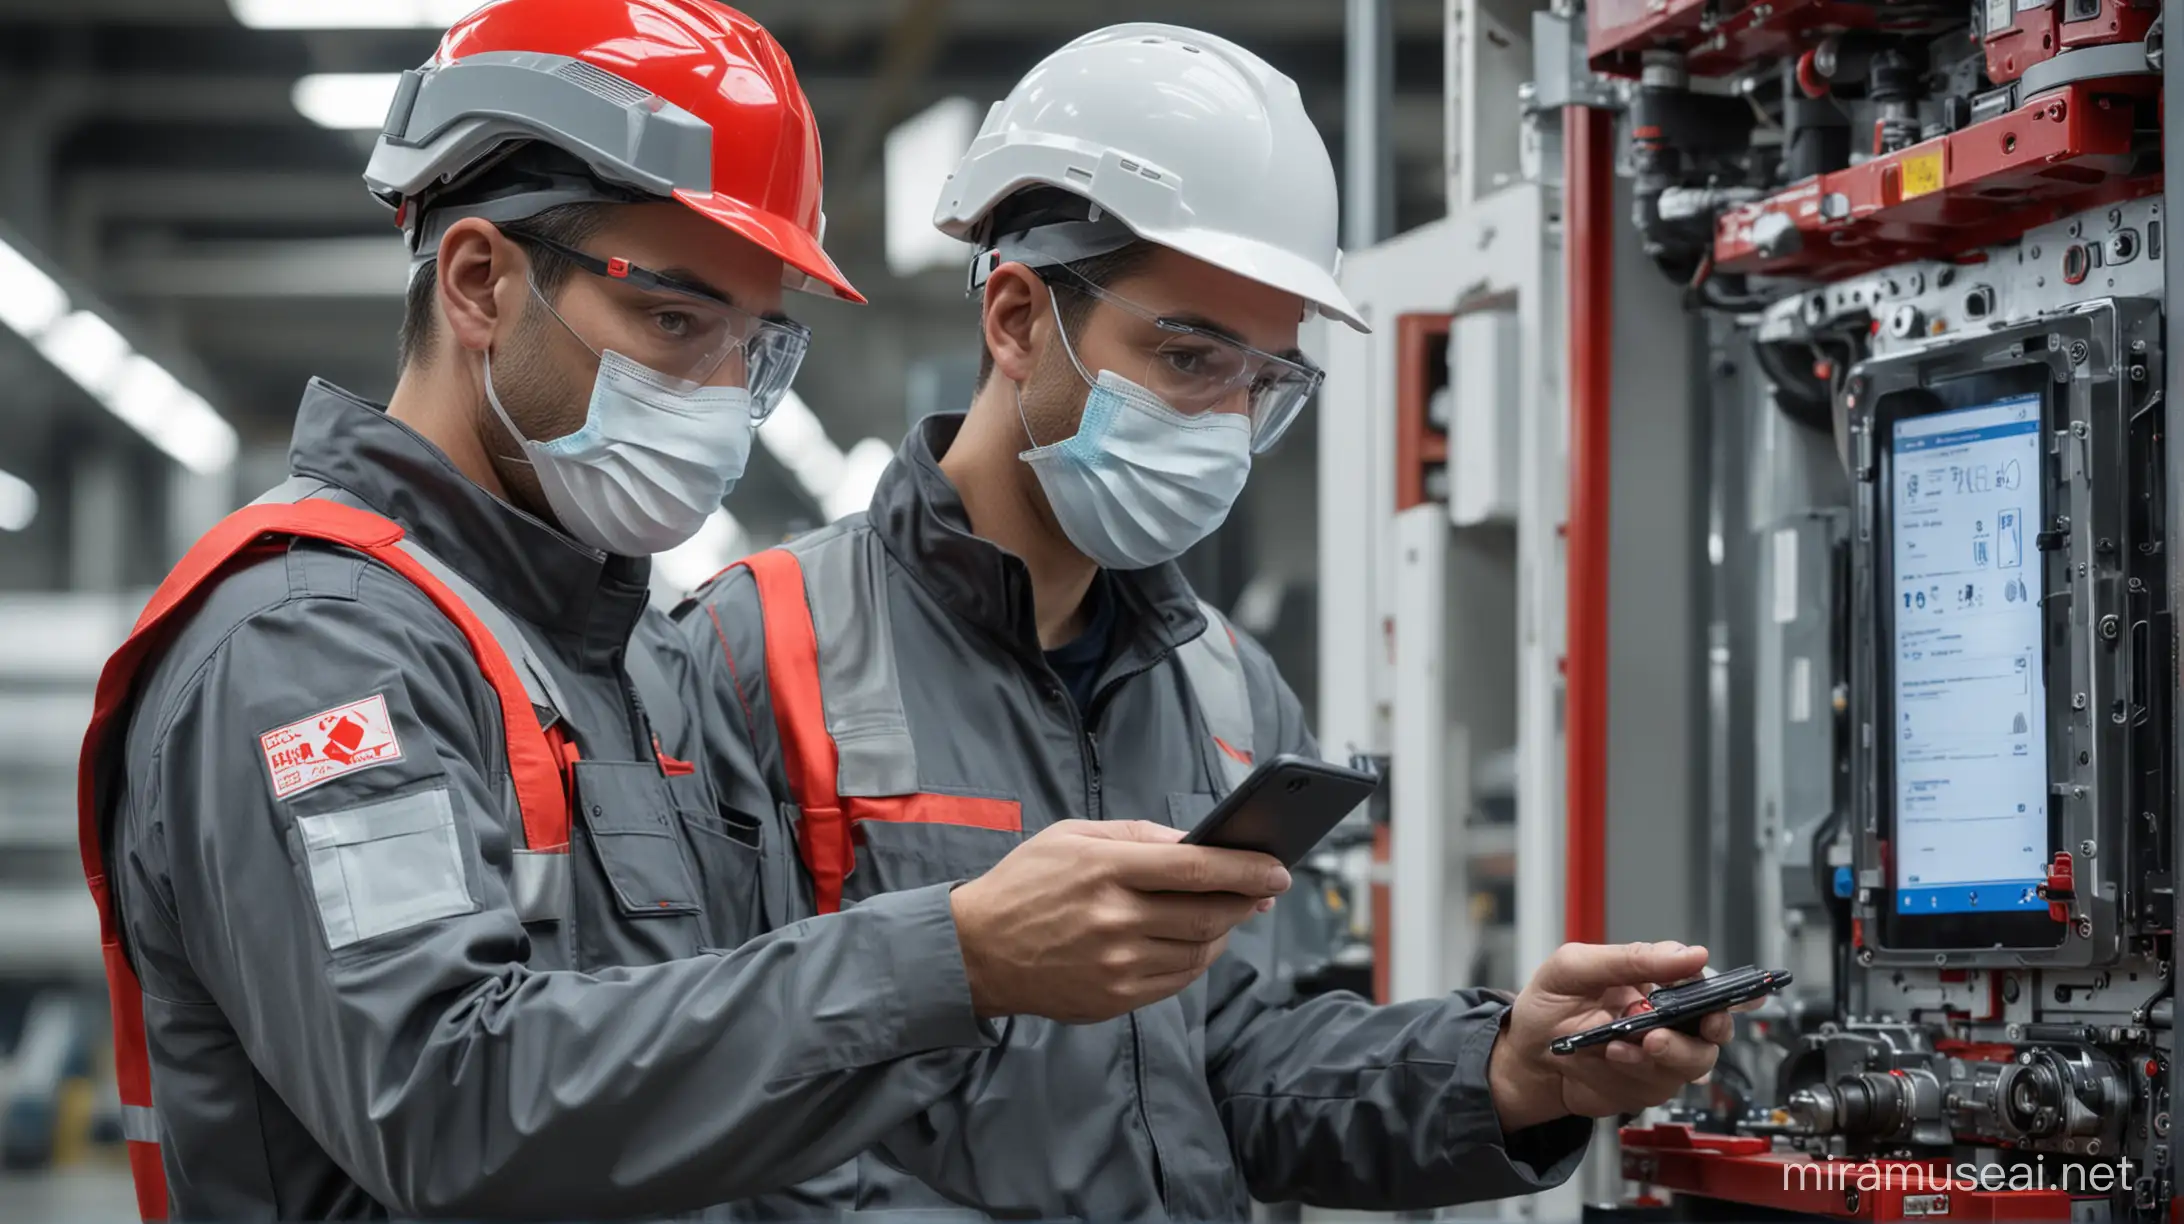 An engineer inspector in a gray uniform with red details, a white mask, a red helmet and an acrylic shield holding a smartphone on his right hand and looking at it. He is very close to a big machine inspecting it with his phone. There should be metal items and the picture must have shades of gray, white, shades of red and some blue details.